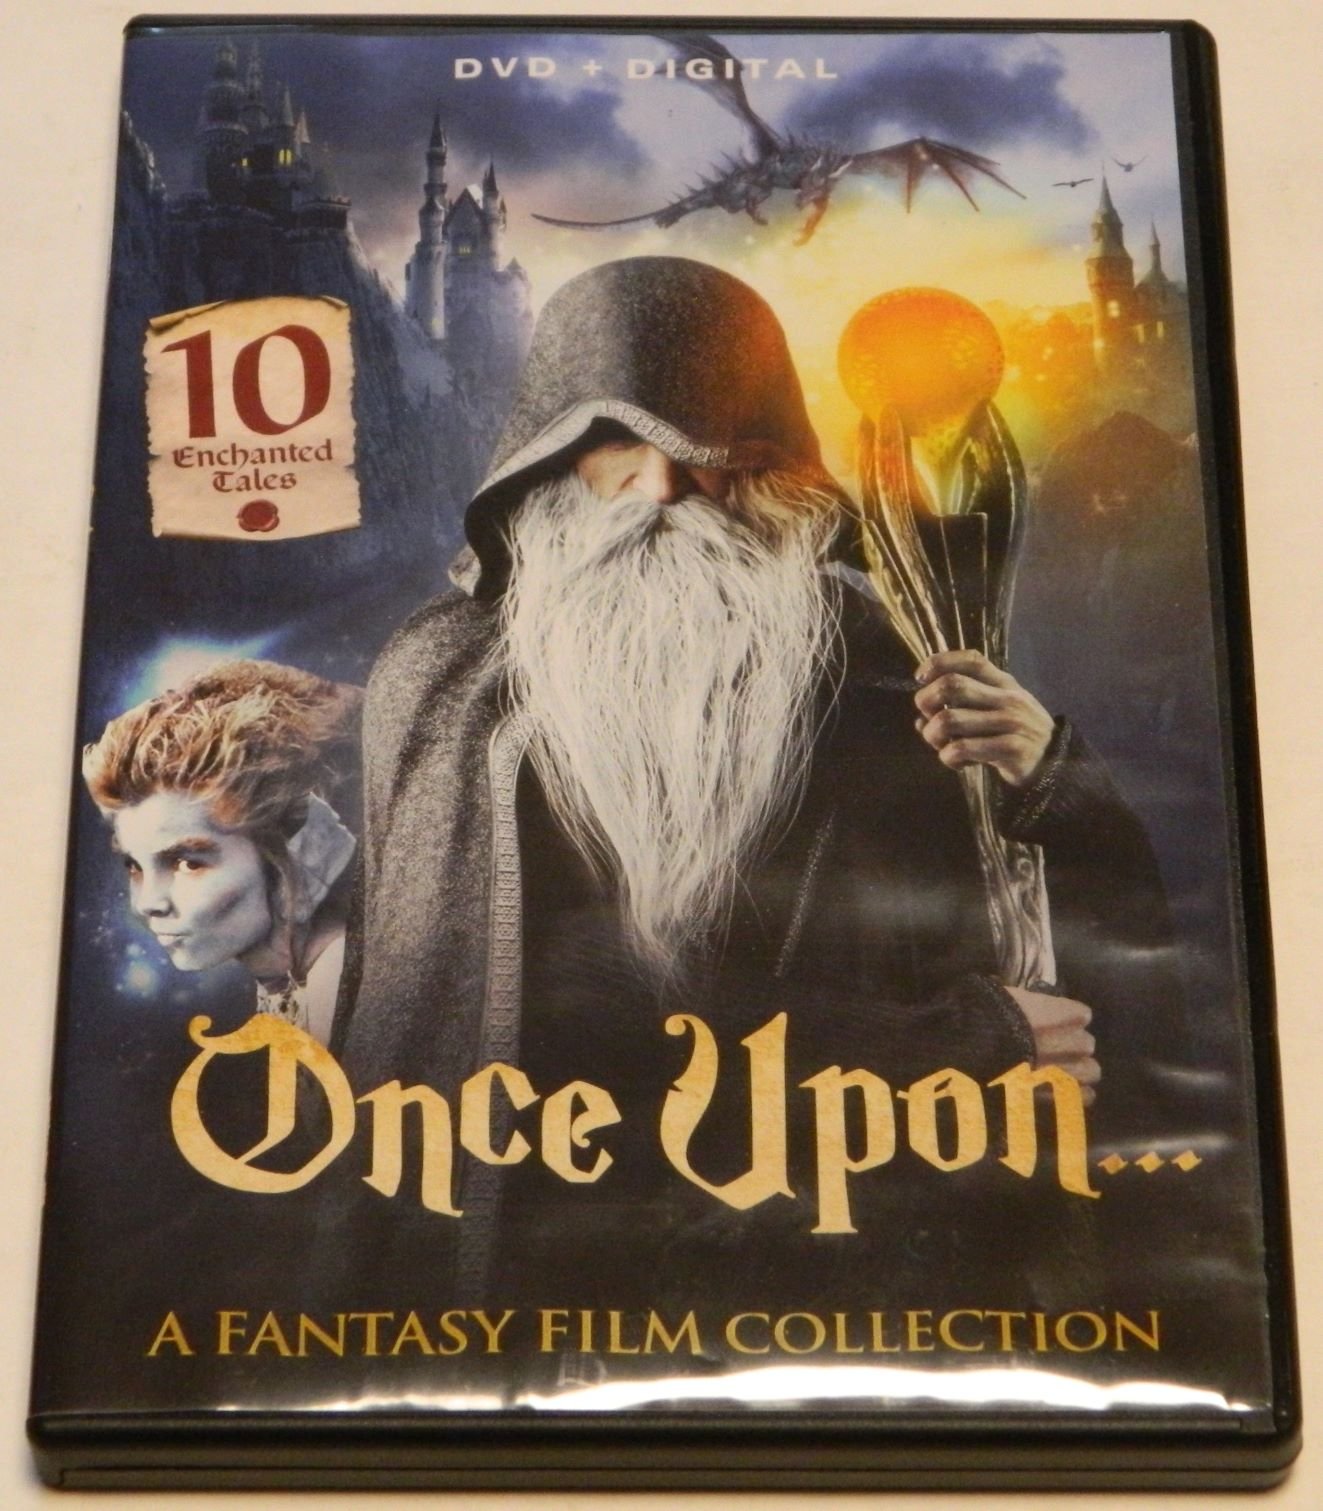 Once Upon A Fantasy Film Collection - 10 Enchanted Films DVD Review -  Geeky Hobbies